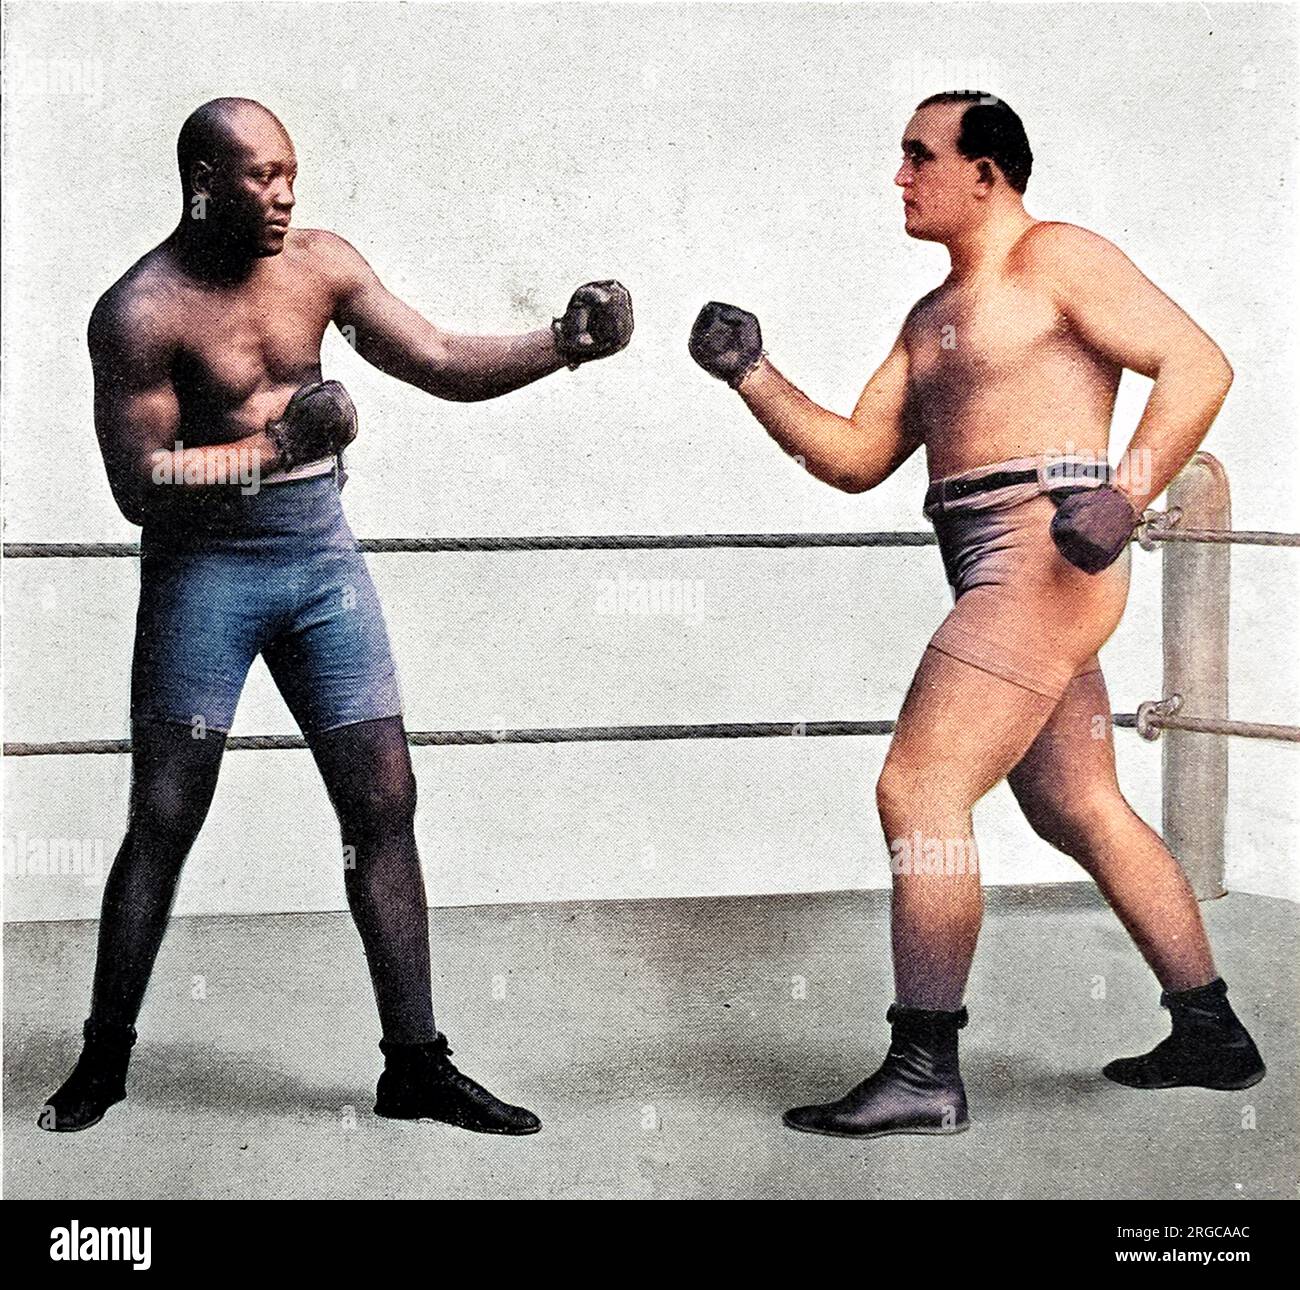 Jack Johnson (1878 - 1946) (left) and James J. Jeffries (1875 - 1953), the heavyweight boxers who fought for the World Championship in 1910. Johnson knocked out Jeffries in the 15th round of their meeting at Reno, Nevada, on 4th July that year. Stock Photo